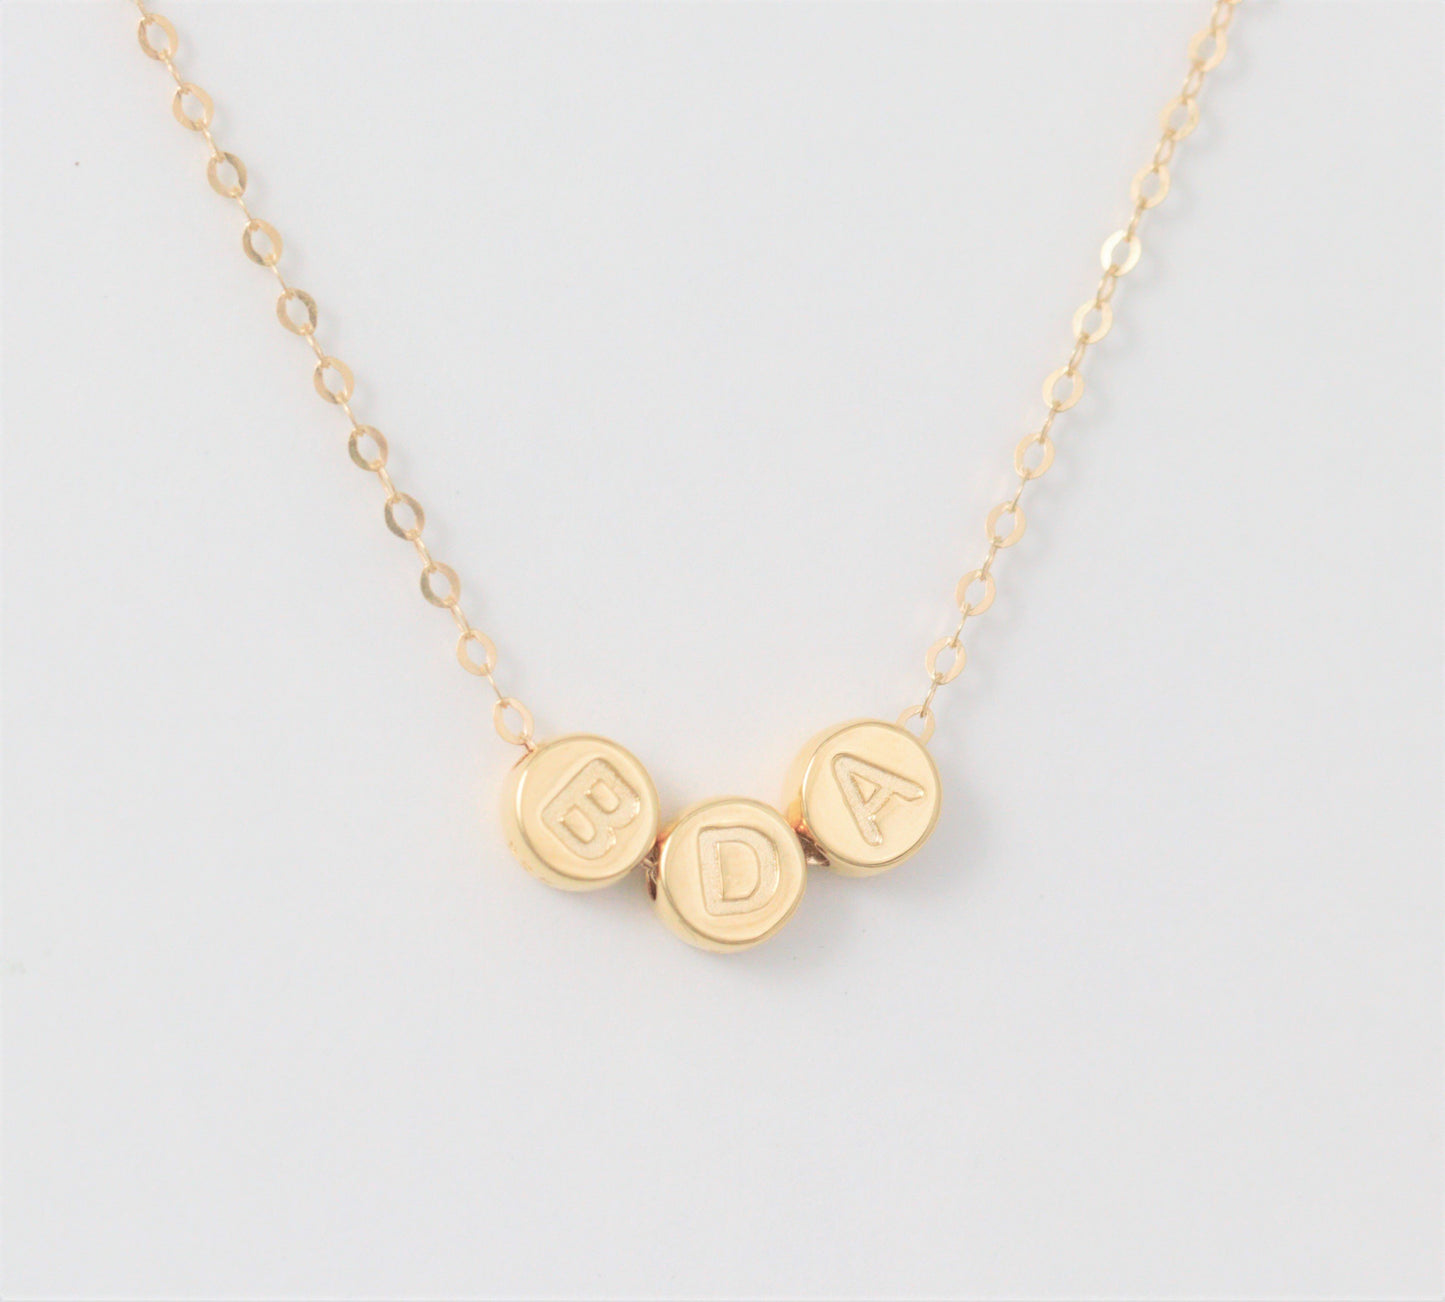 Gold Initial Necklace with Personalized Letters